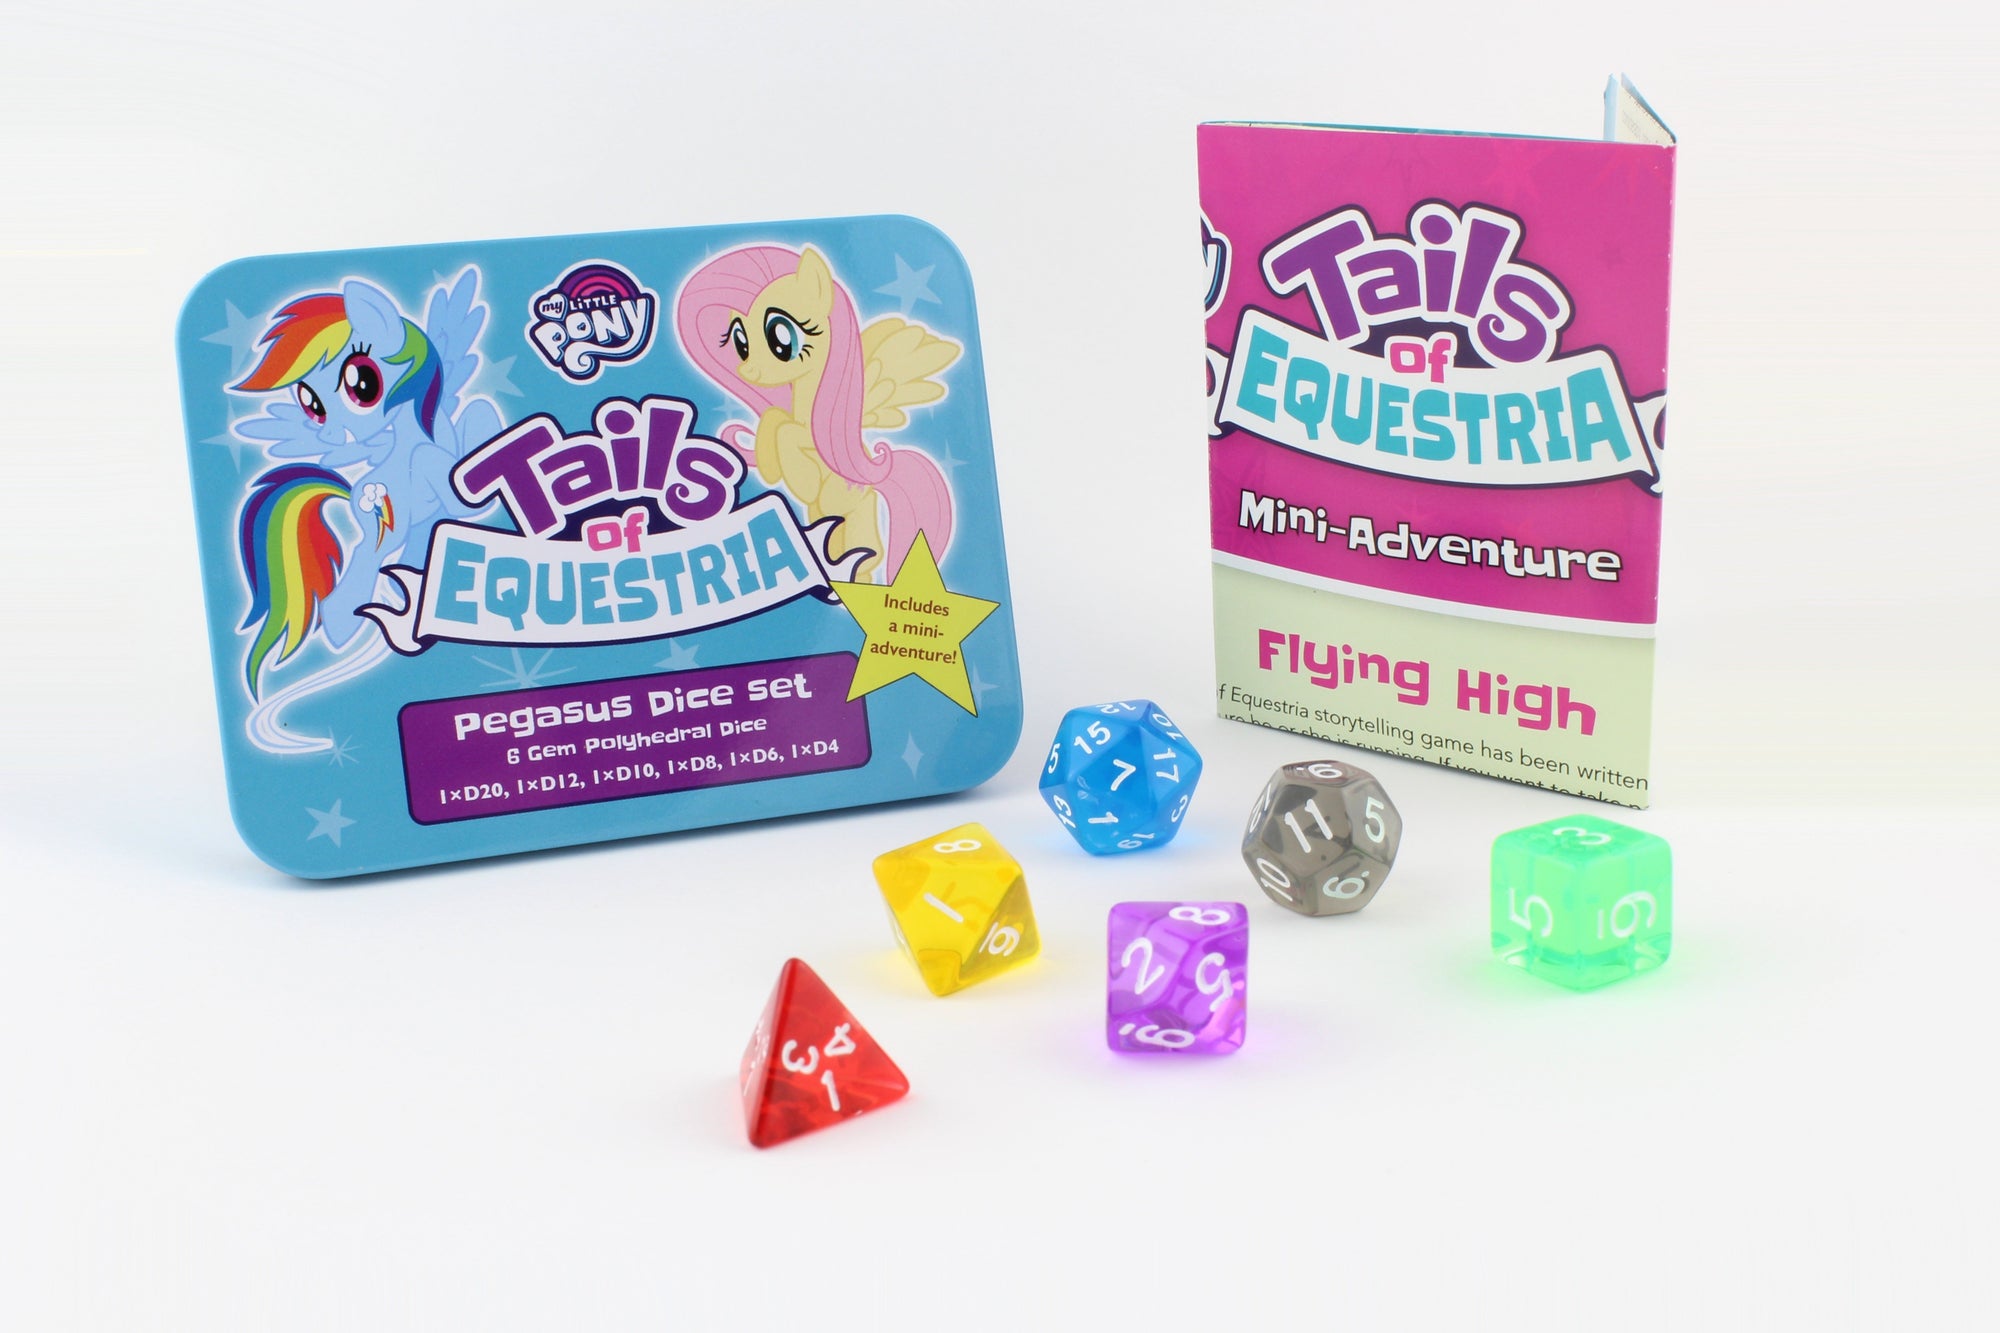 My Little Pony Rpg Tails Of Equestria Pegasus Dice Set - Good Games